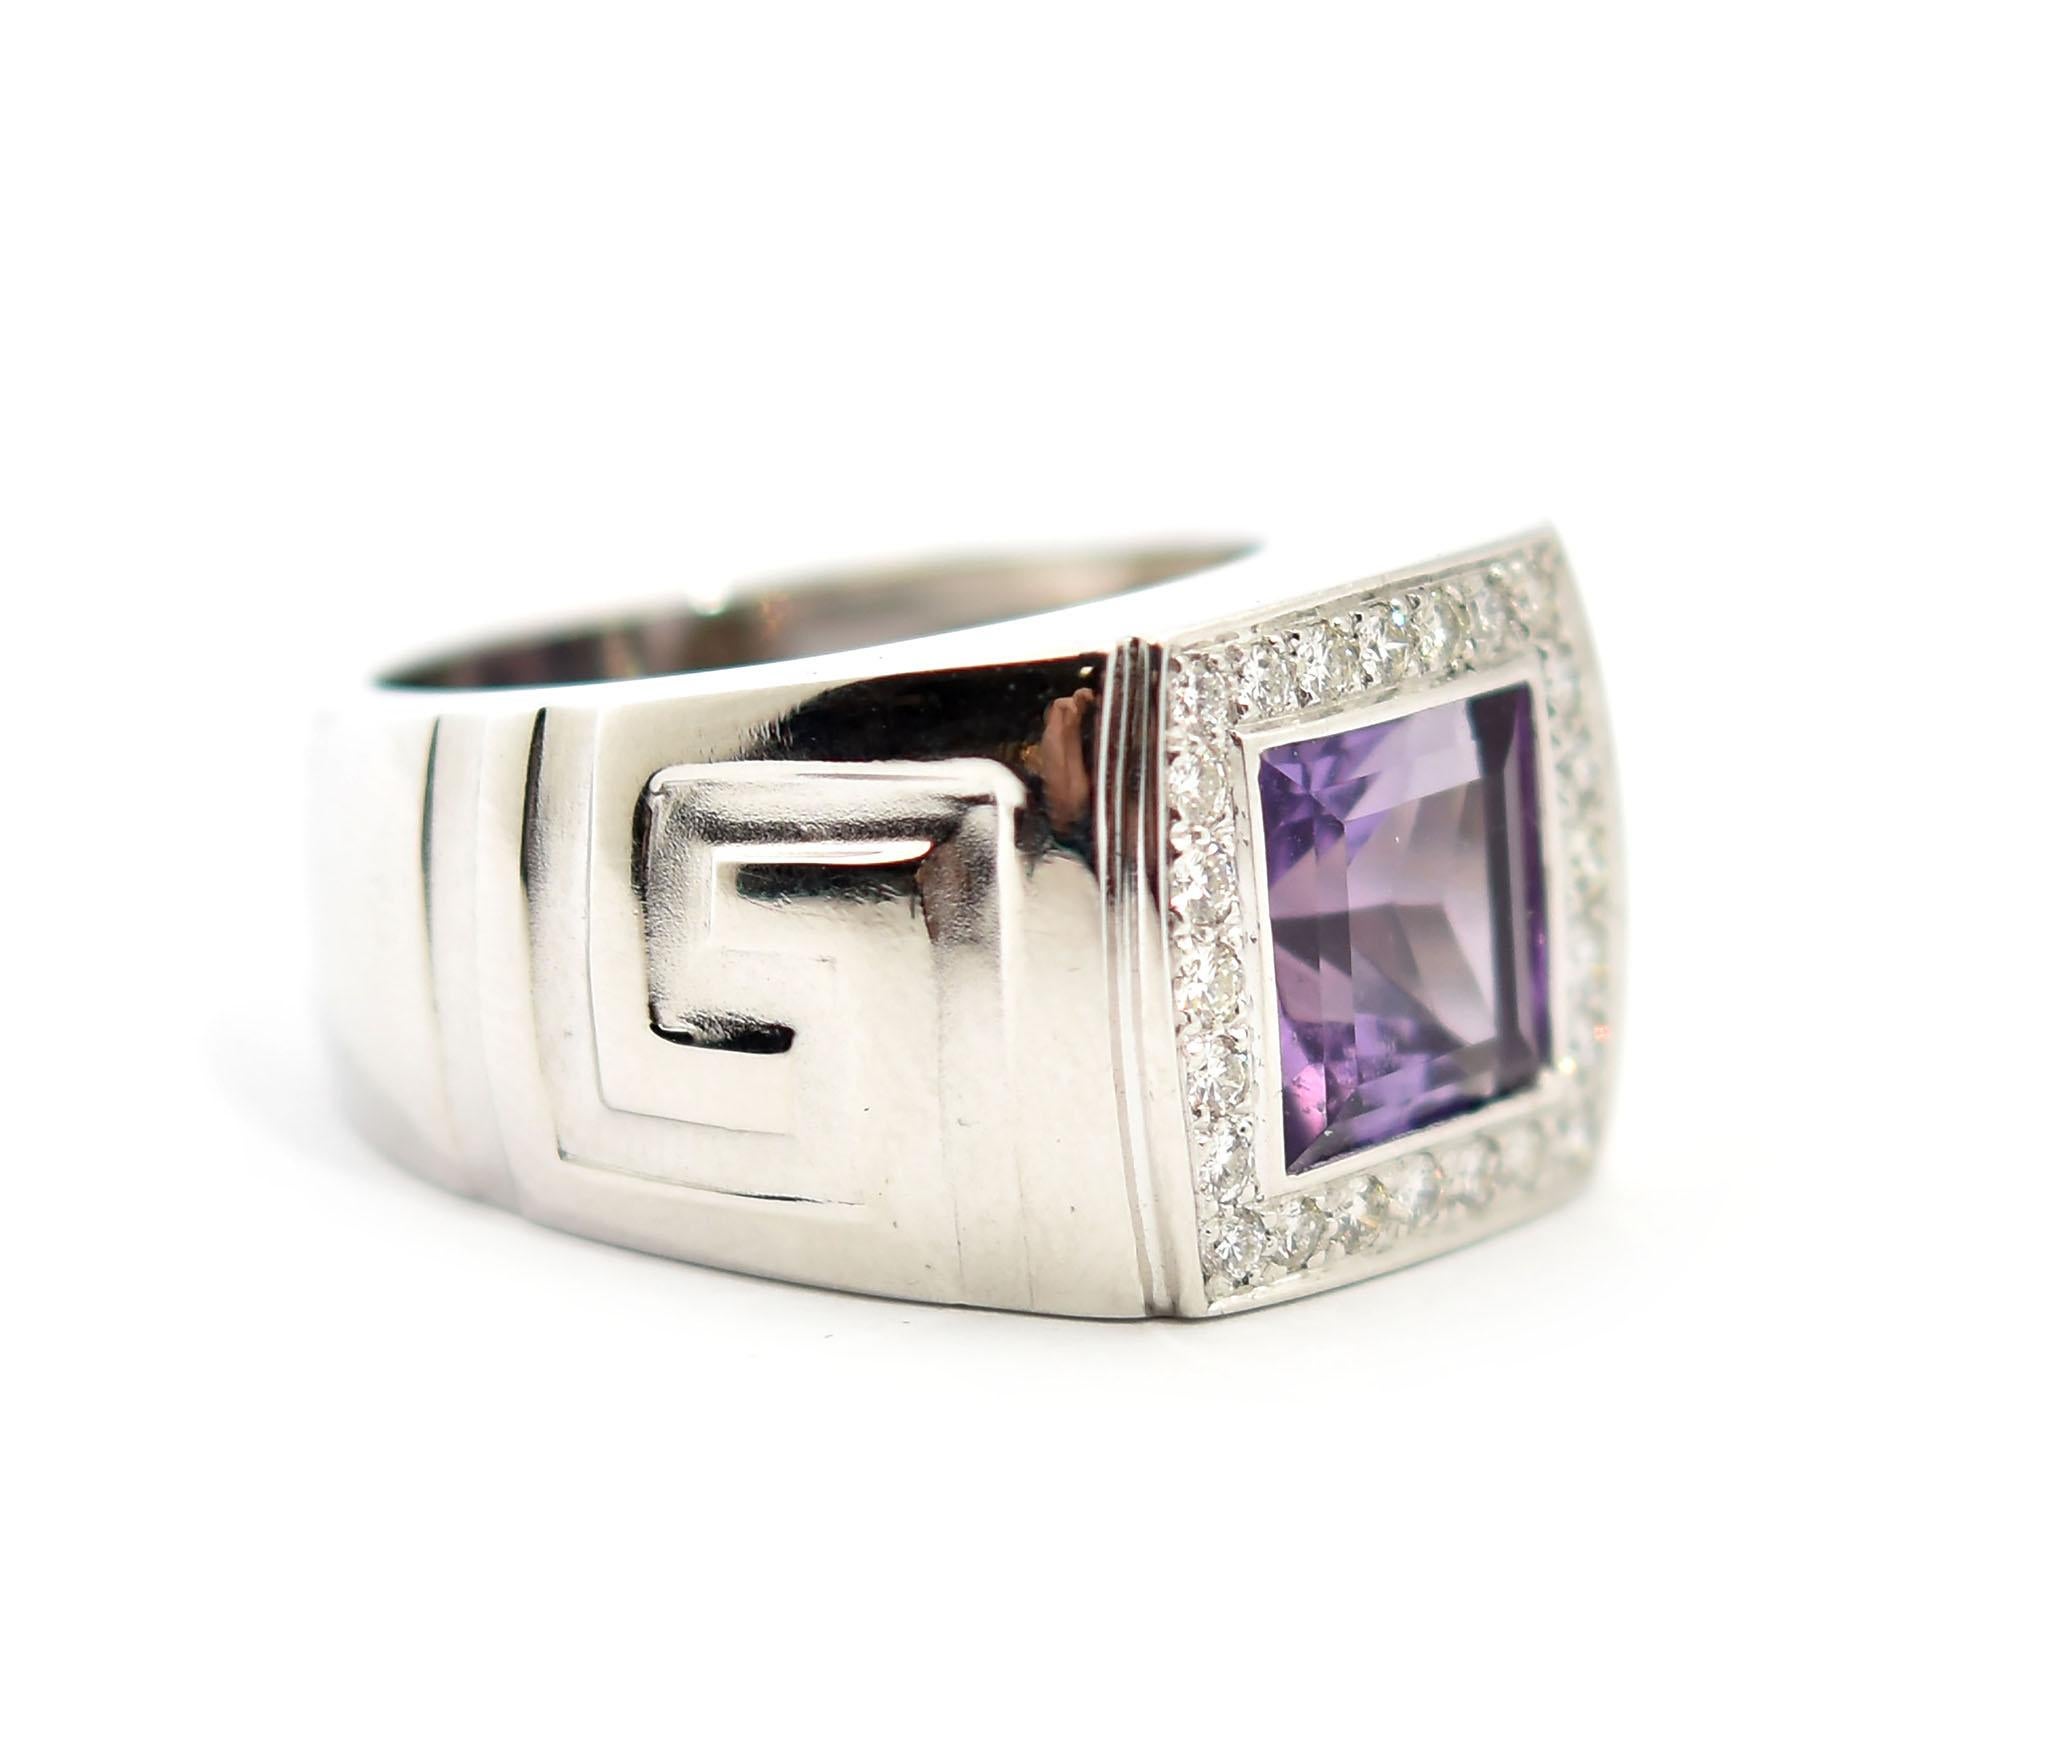 This gorgeous cocktail ring is designer in 18k white gold by VERSACE. The ring features a square-cut amethyst accented by a halo of round diamonds. The diamonds have a total weight of 0.48ct. The ring measures 15mm wide, and it weighs 17.22 grams.